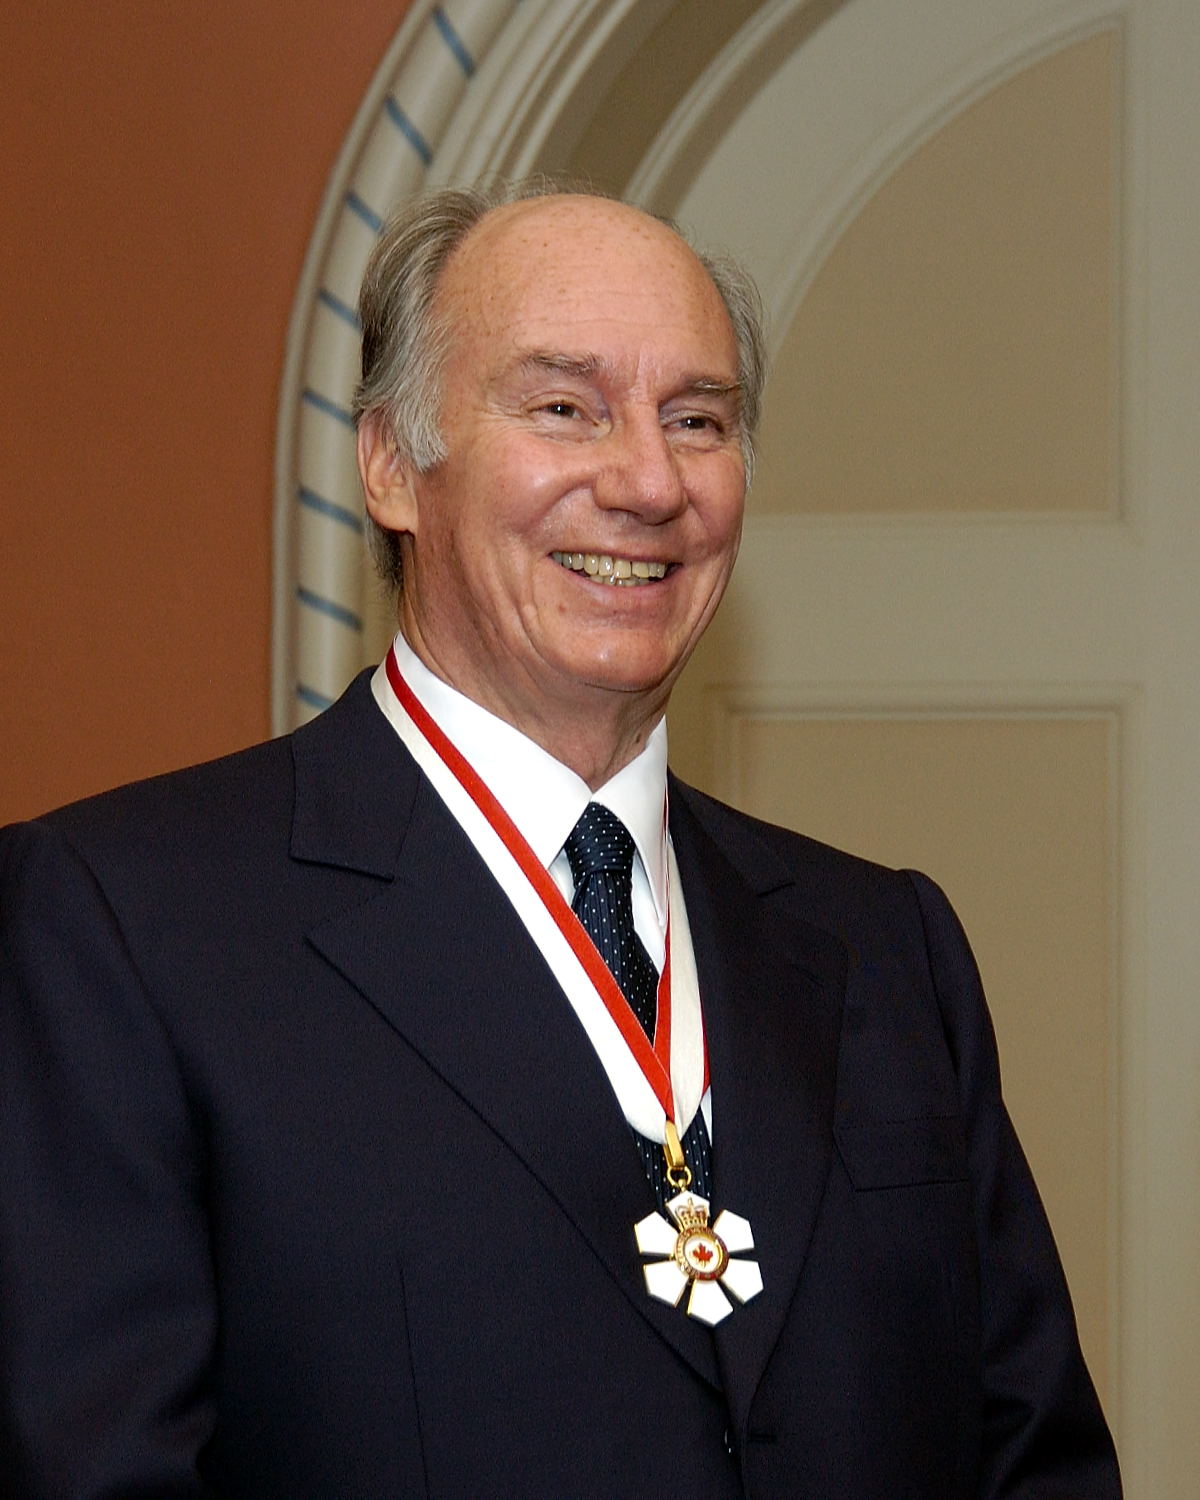 Hazar Imam is to be invested with the Honorary Companion of the order of Canada 